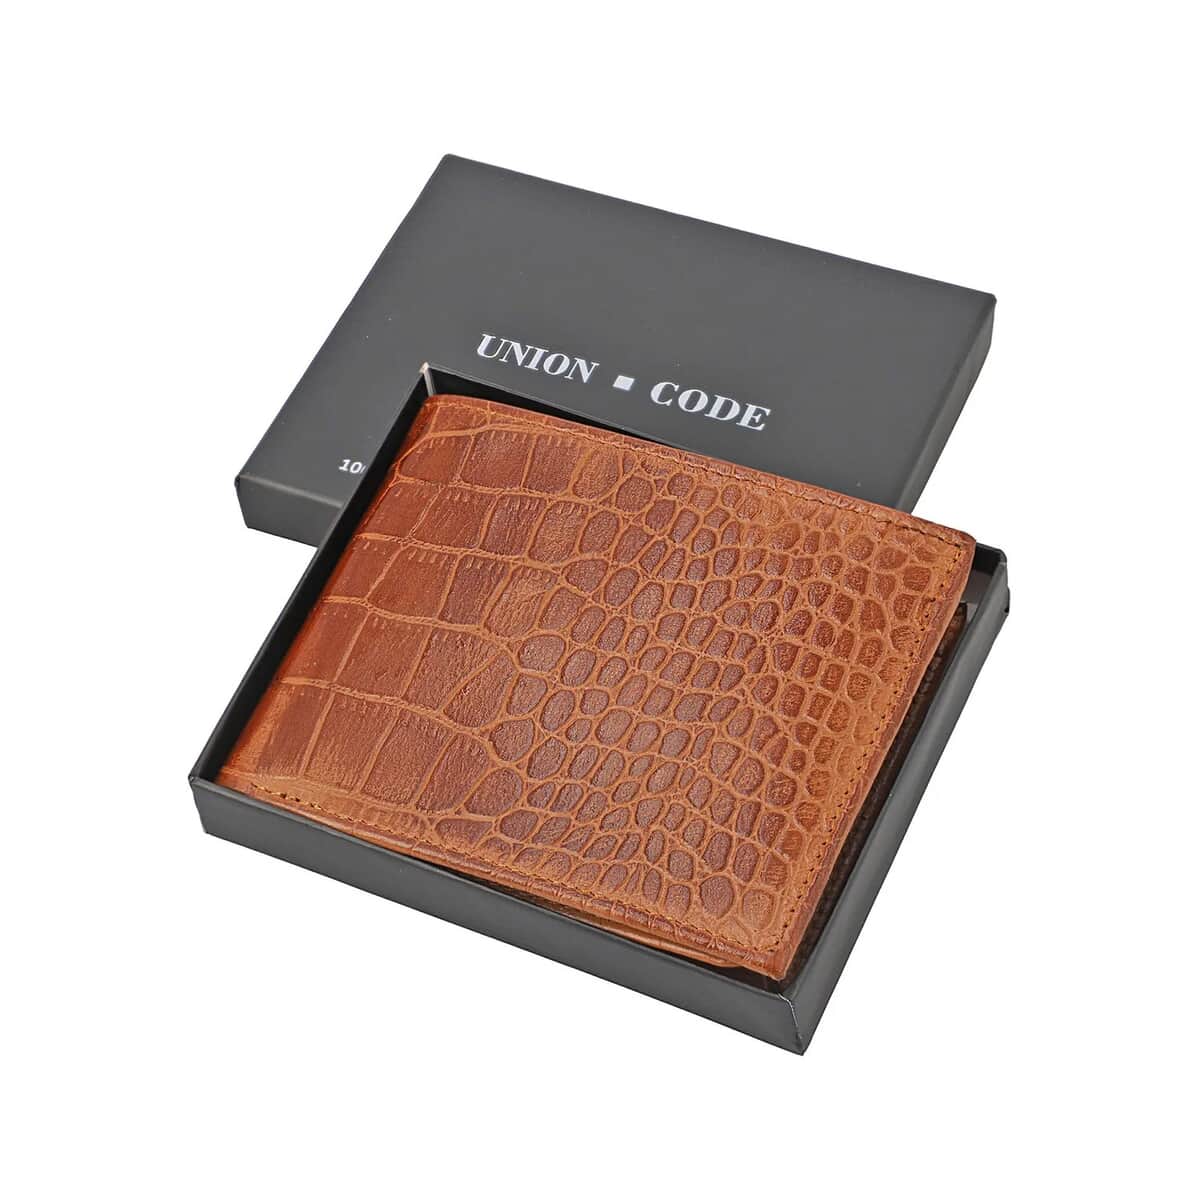 UNION CODE Tan Croco Embossed Genuine Leather RFID Bi Fold Men's Wallet | Leather Card Holder Travel Wallet | Leather Purse for Men image number 6